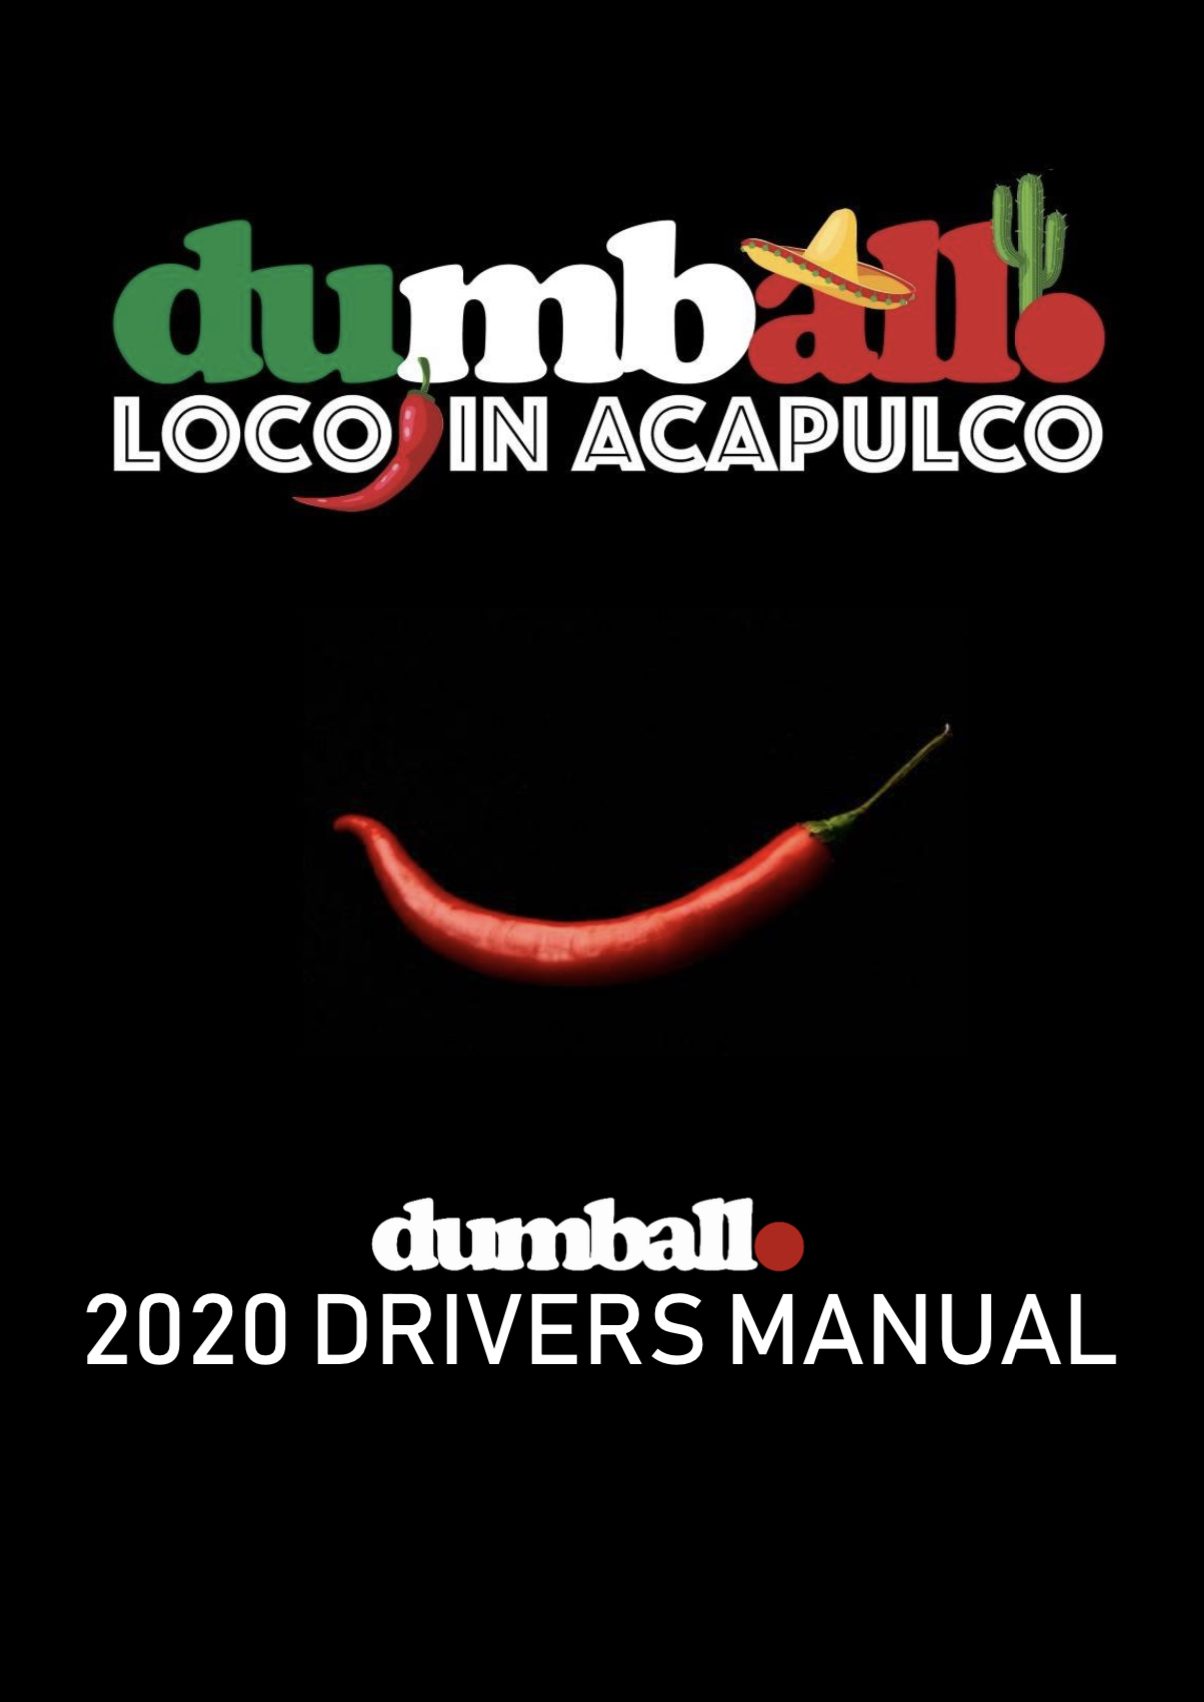 Dumball 2020: Your Manual